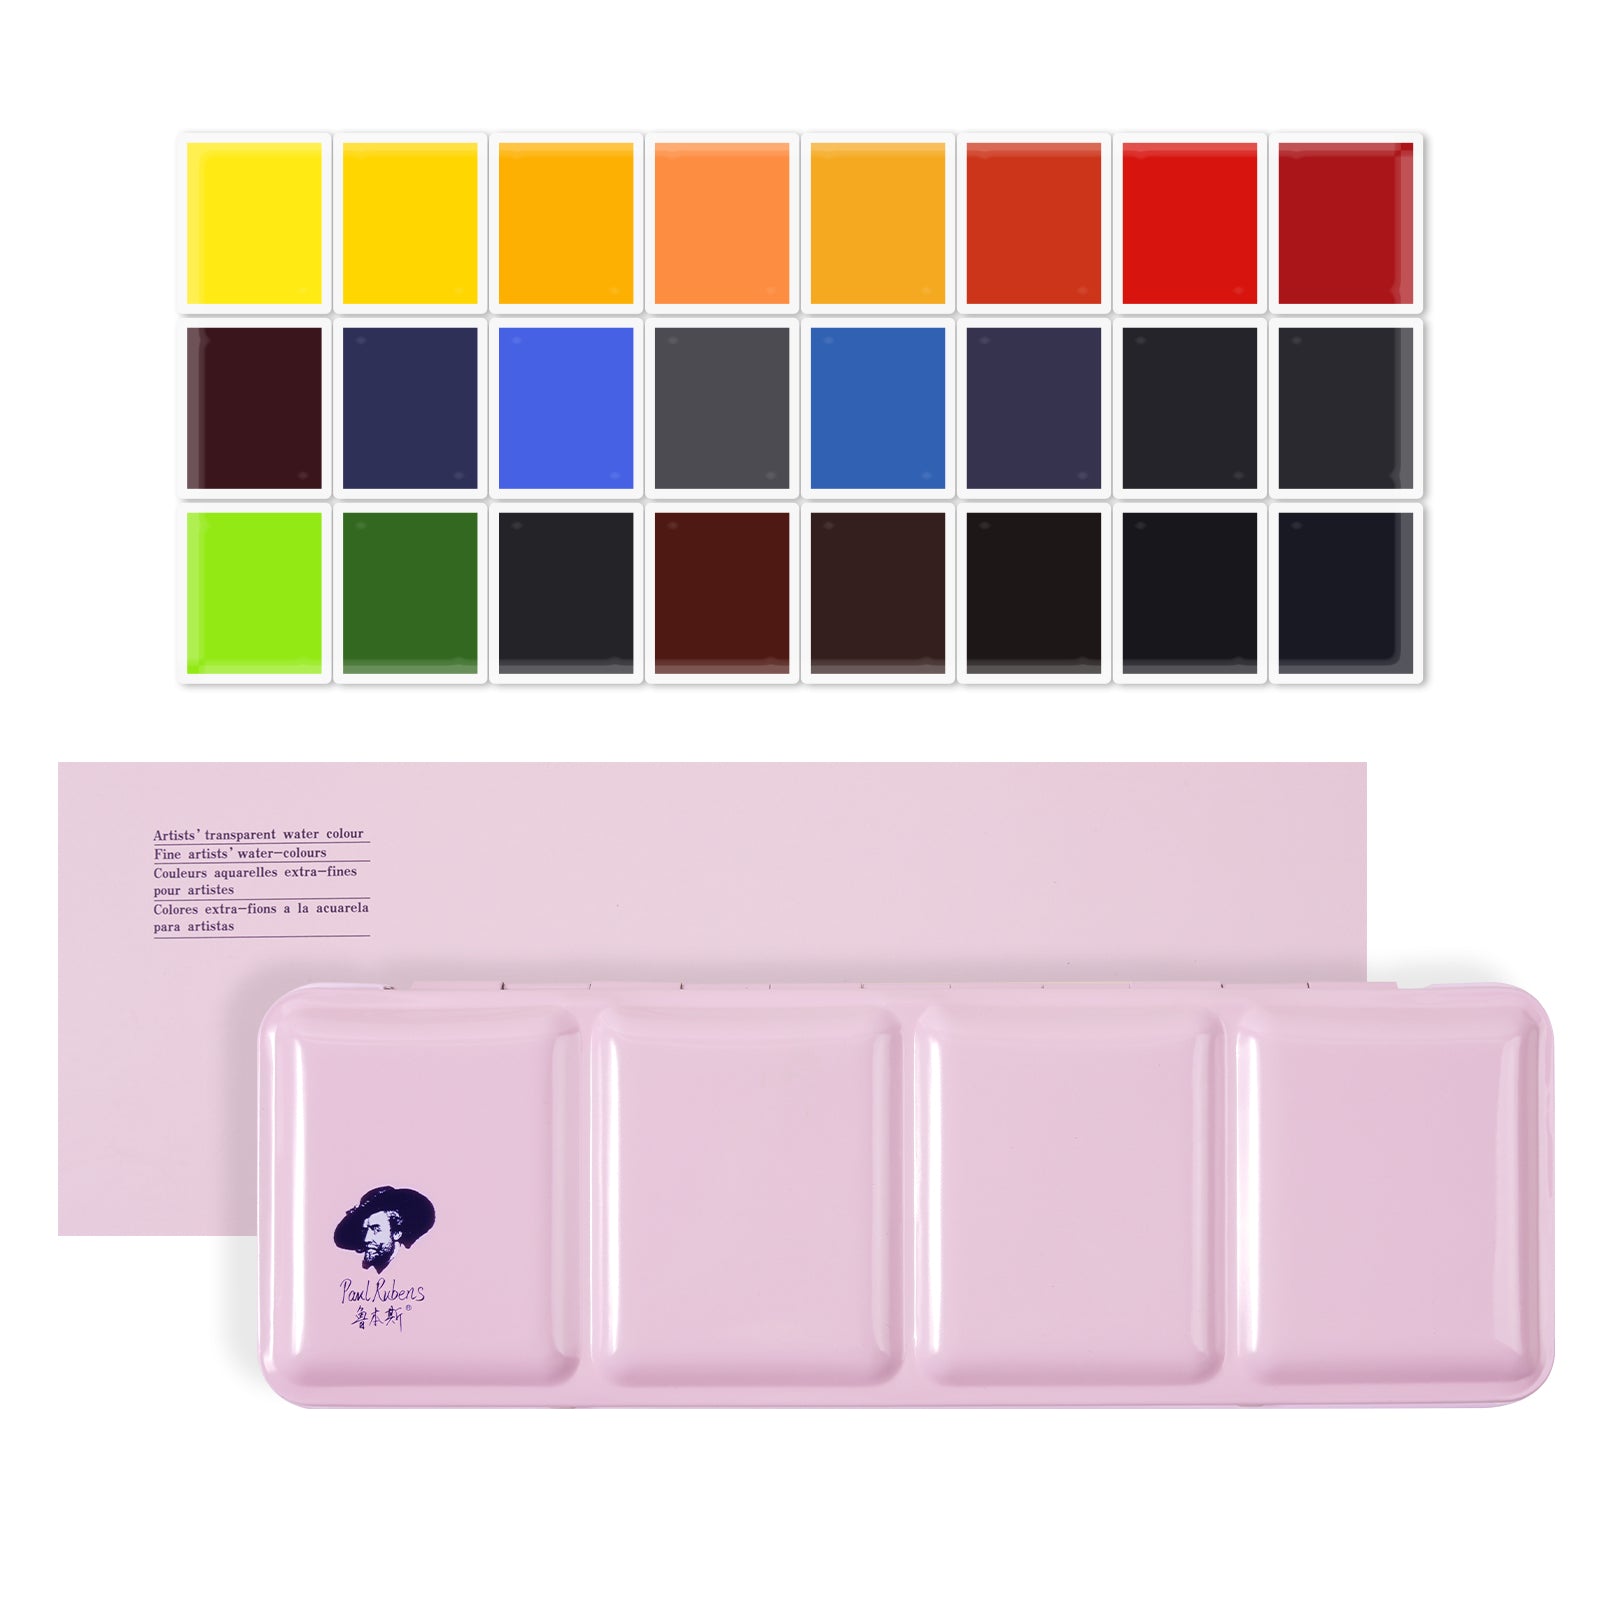 Paul Rubens Professional Watercolor Paint Set Artist Grade, 24 Vivid Colors with Portable Metal Box for Artists, Beginners, Hobbyists, Students